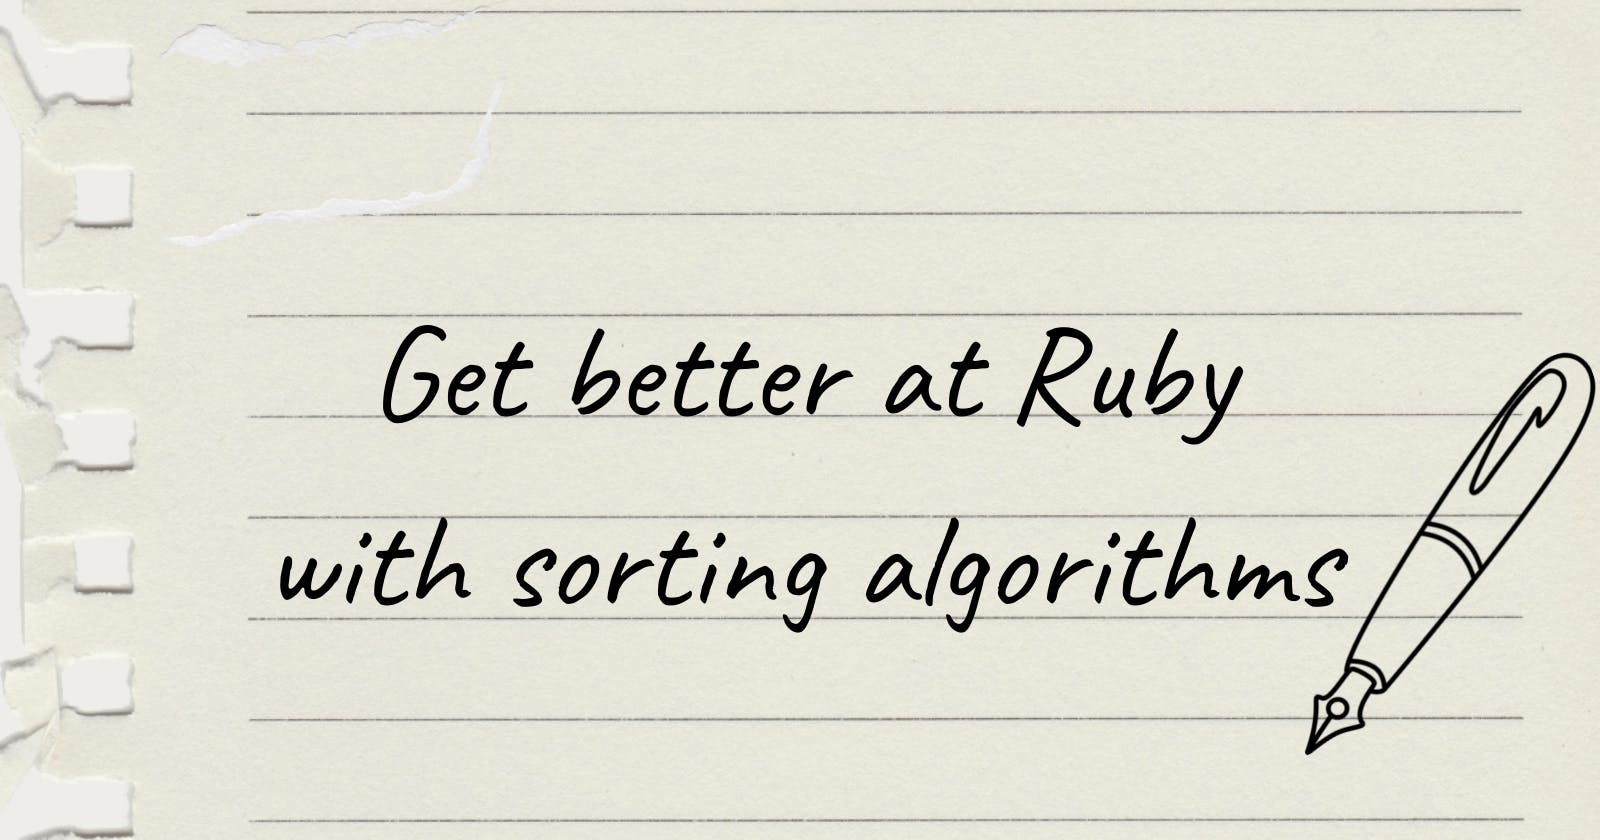 Get better at Ruby with sorting algorithms